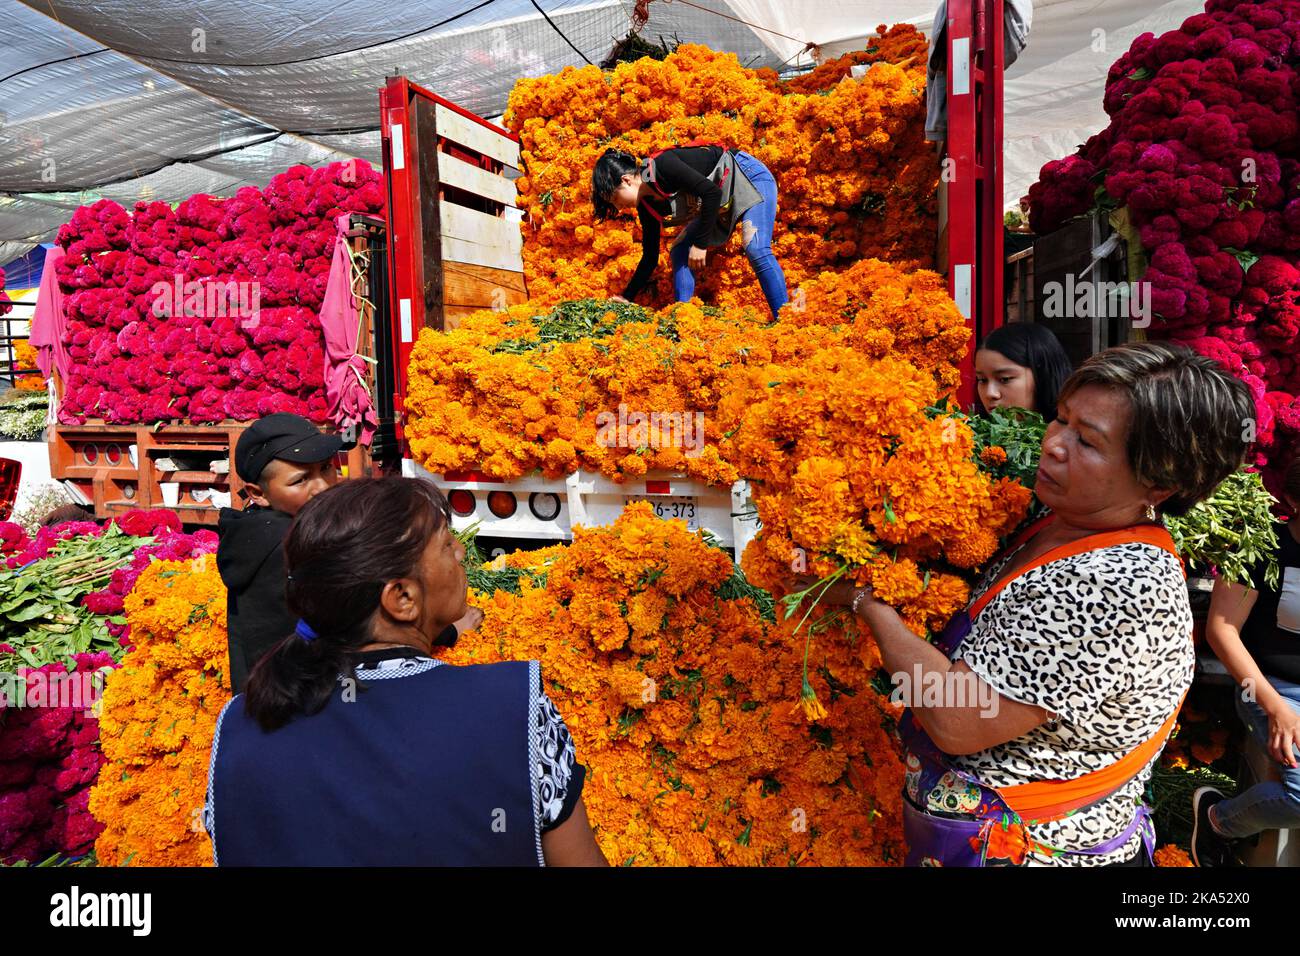 Mexico City, Mexico. 31st Oct, 2022. Mexican women purchase bundles of cempasuchil flowers, the traditional Day of the Dead flower used to decorate altars and gravesites during the annual festival at the Jamaica Flower Market, October 31, 2022 in Mexico City, Mexico. Credit: Richard Ellis/Richard Ellis/Alamy Live News Stock Photo